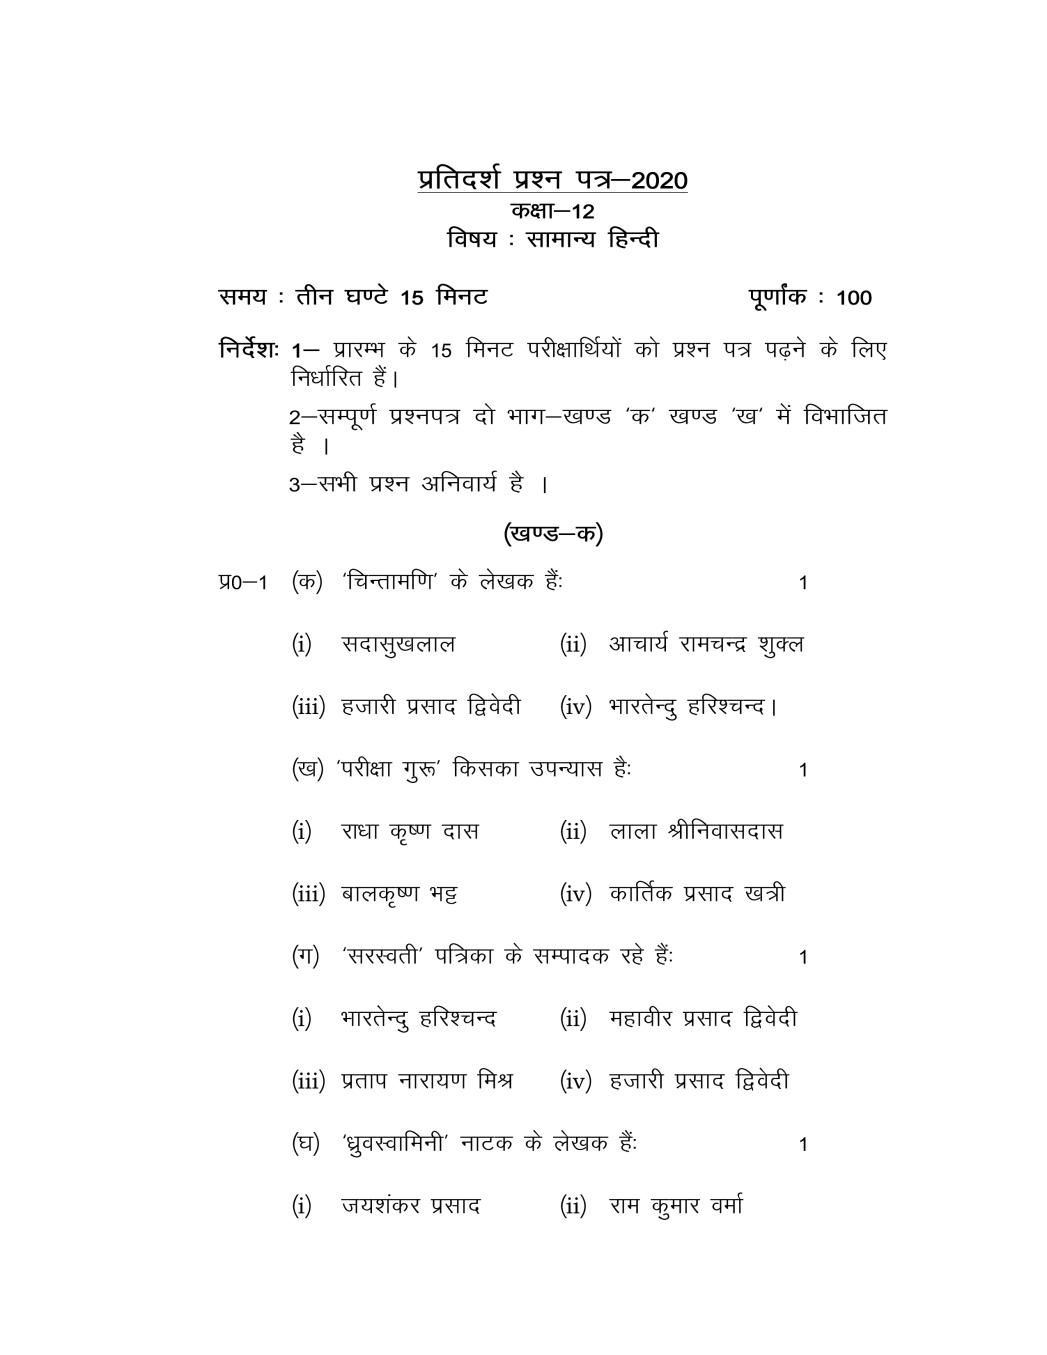 UP Board Class 12 Model Paper 2020 GENERAL HINDI - Page 1